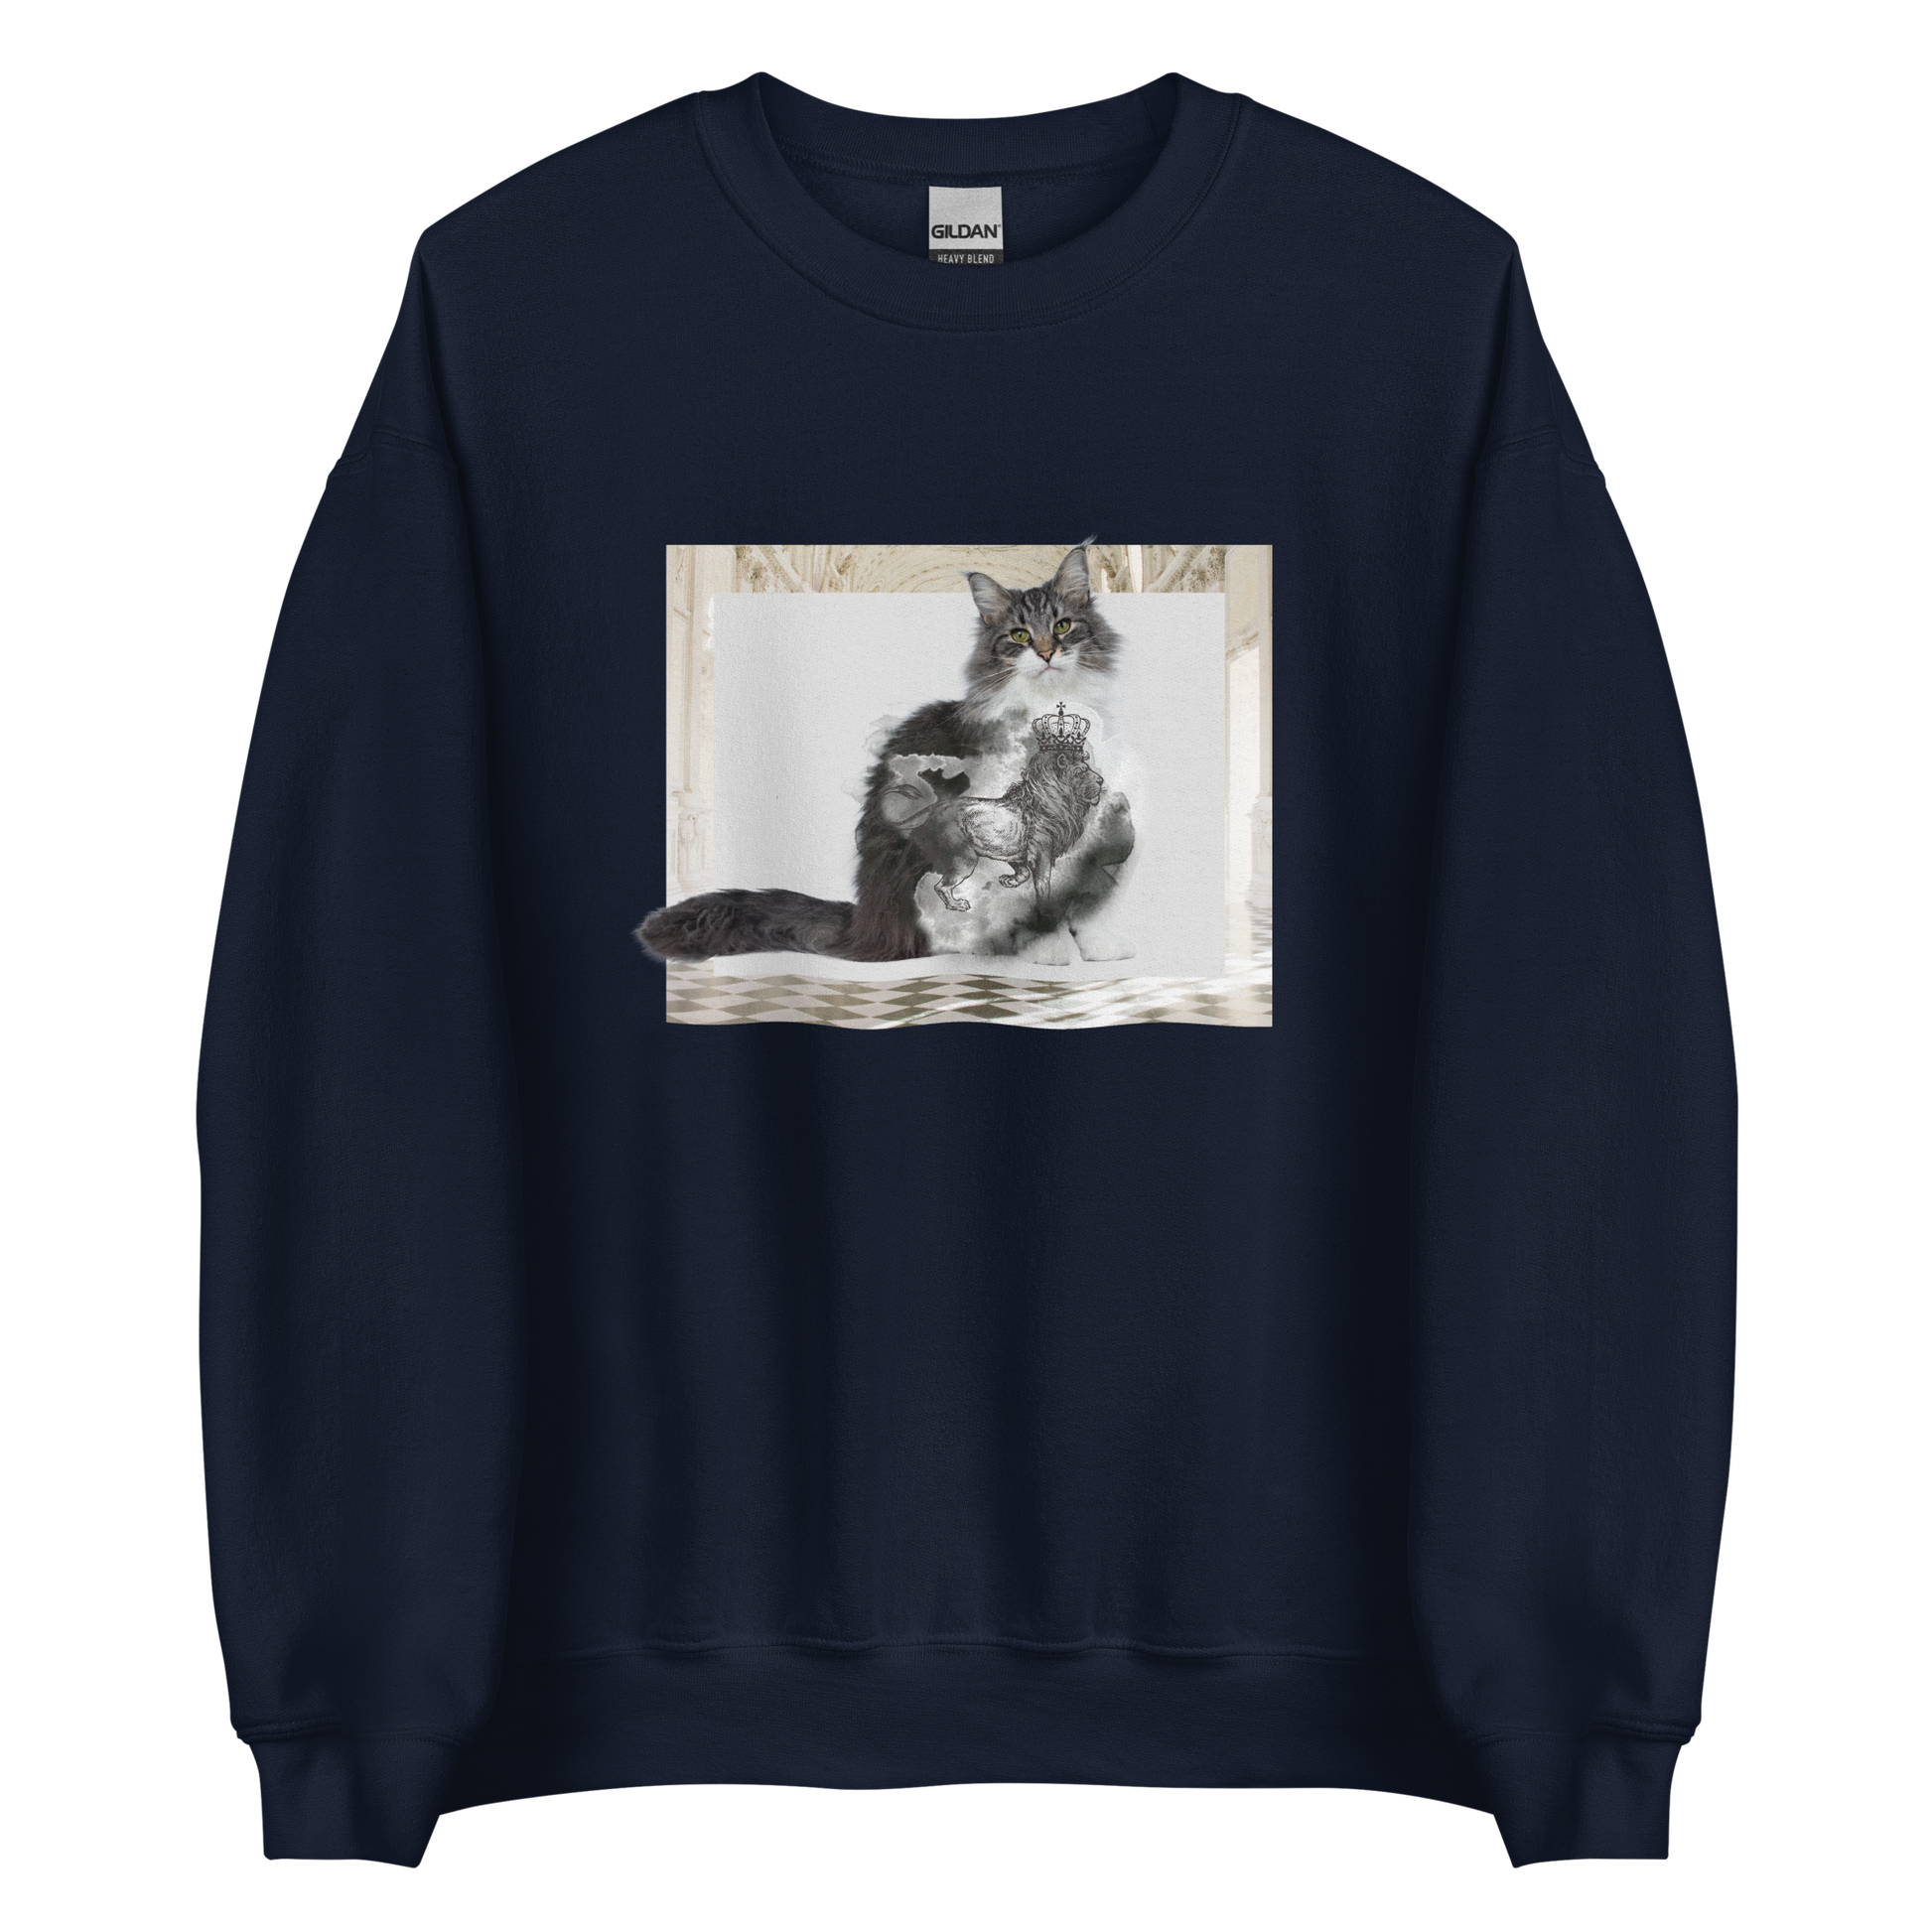 Navy Royal Cat Sweatshirt featuring a Majestic Cat graphic on the chest - Cute Graphic Cat Sweatshirts - Boozy Fox